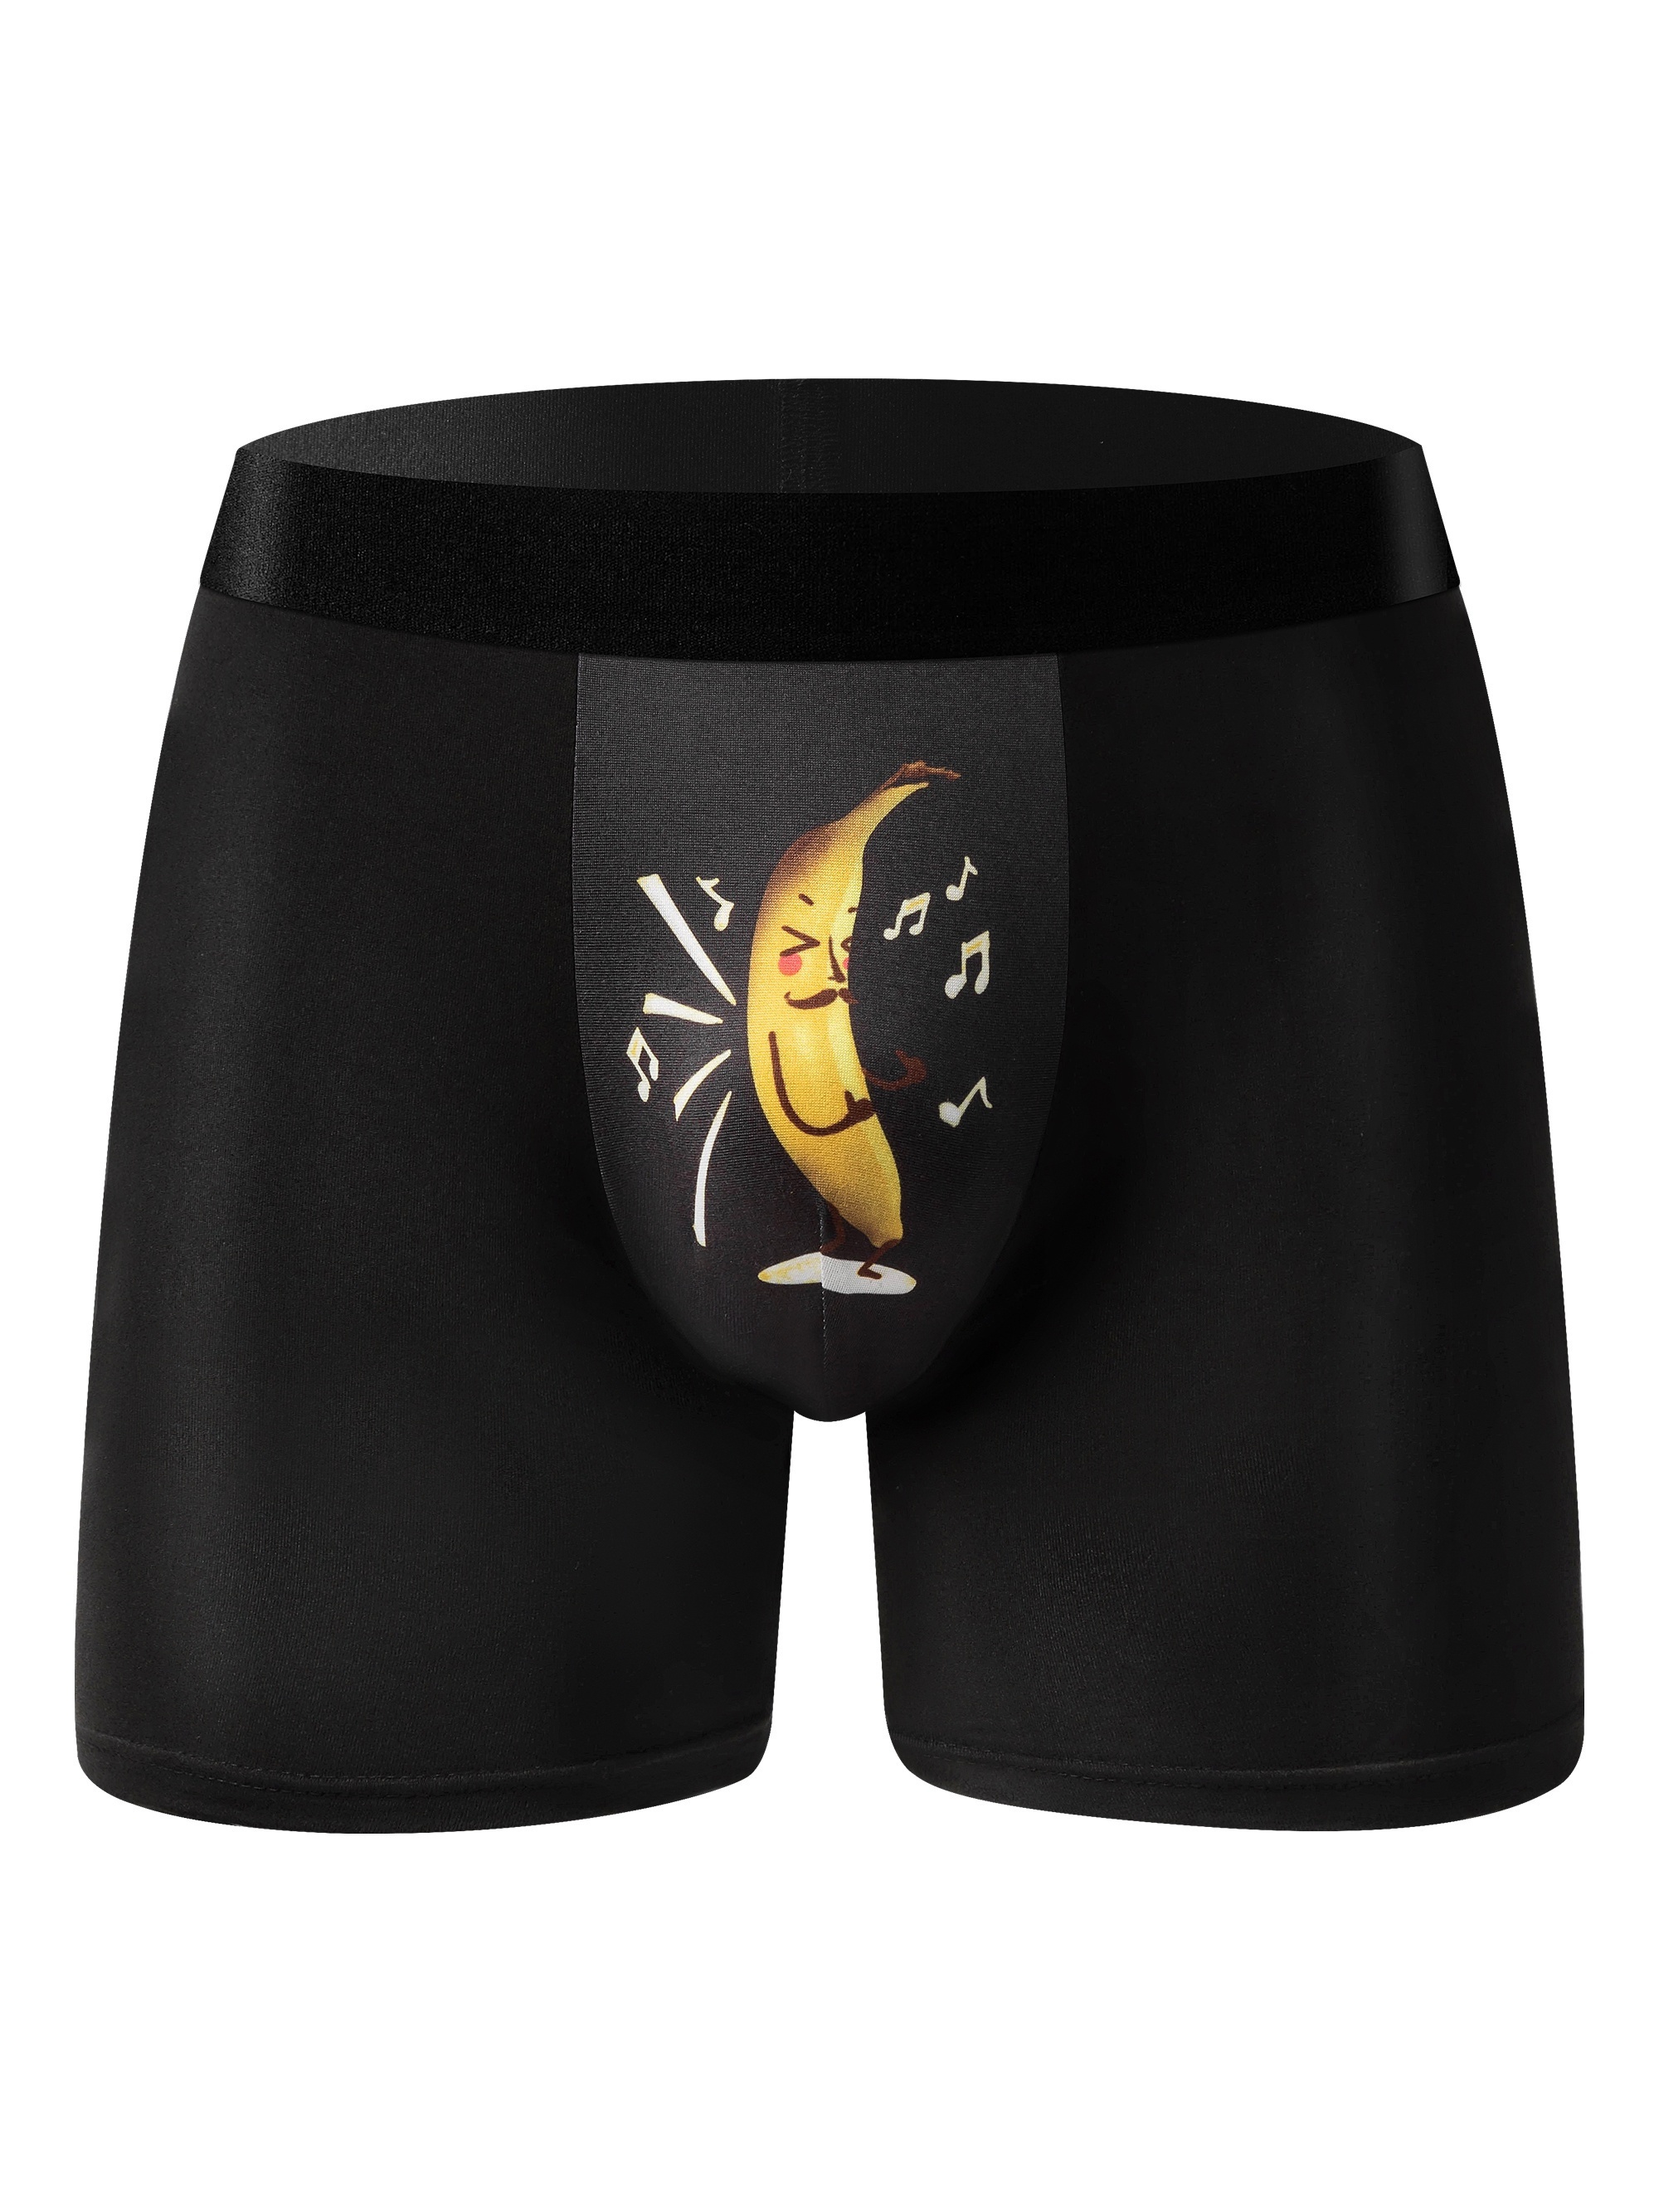 Mens Humorous 3D Eggplant Printed Boxer Funny Boxer Briefs Novelty